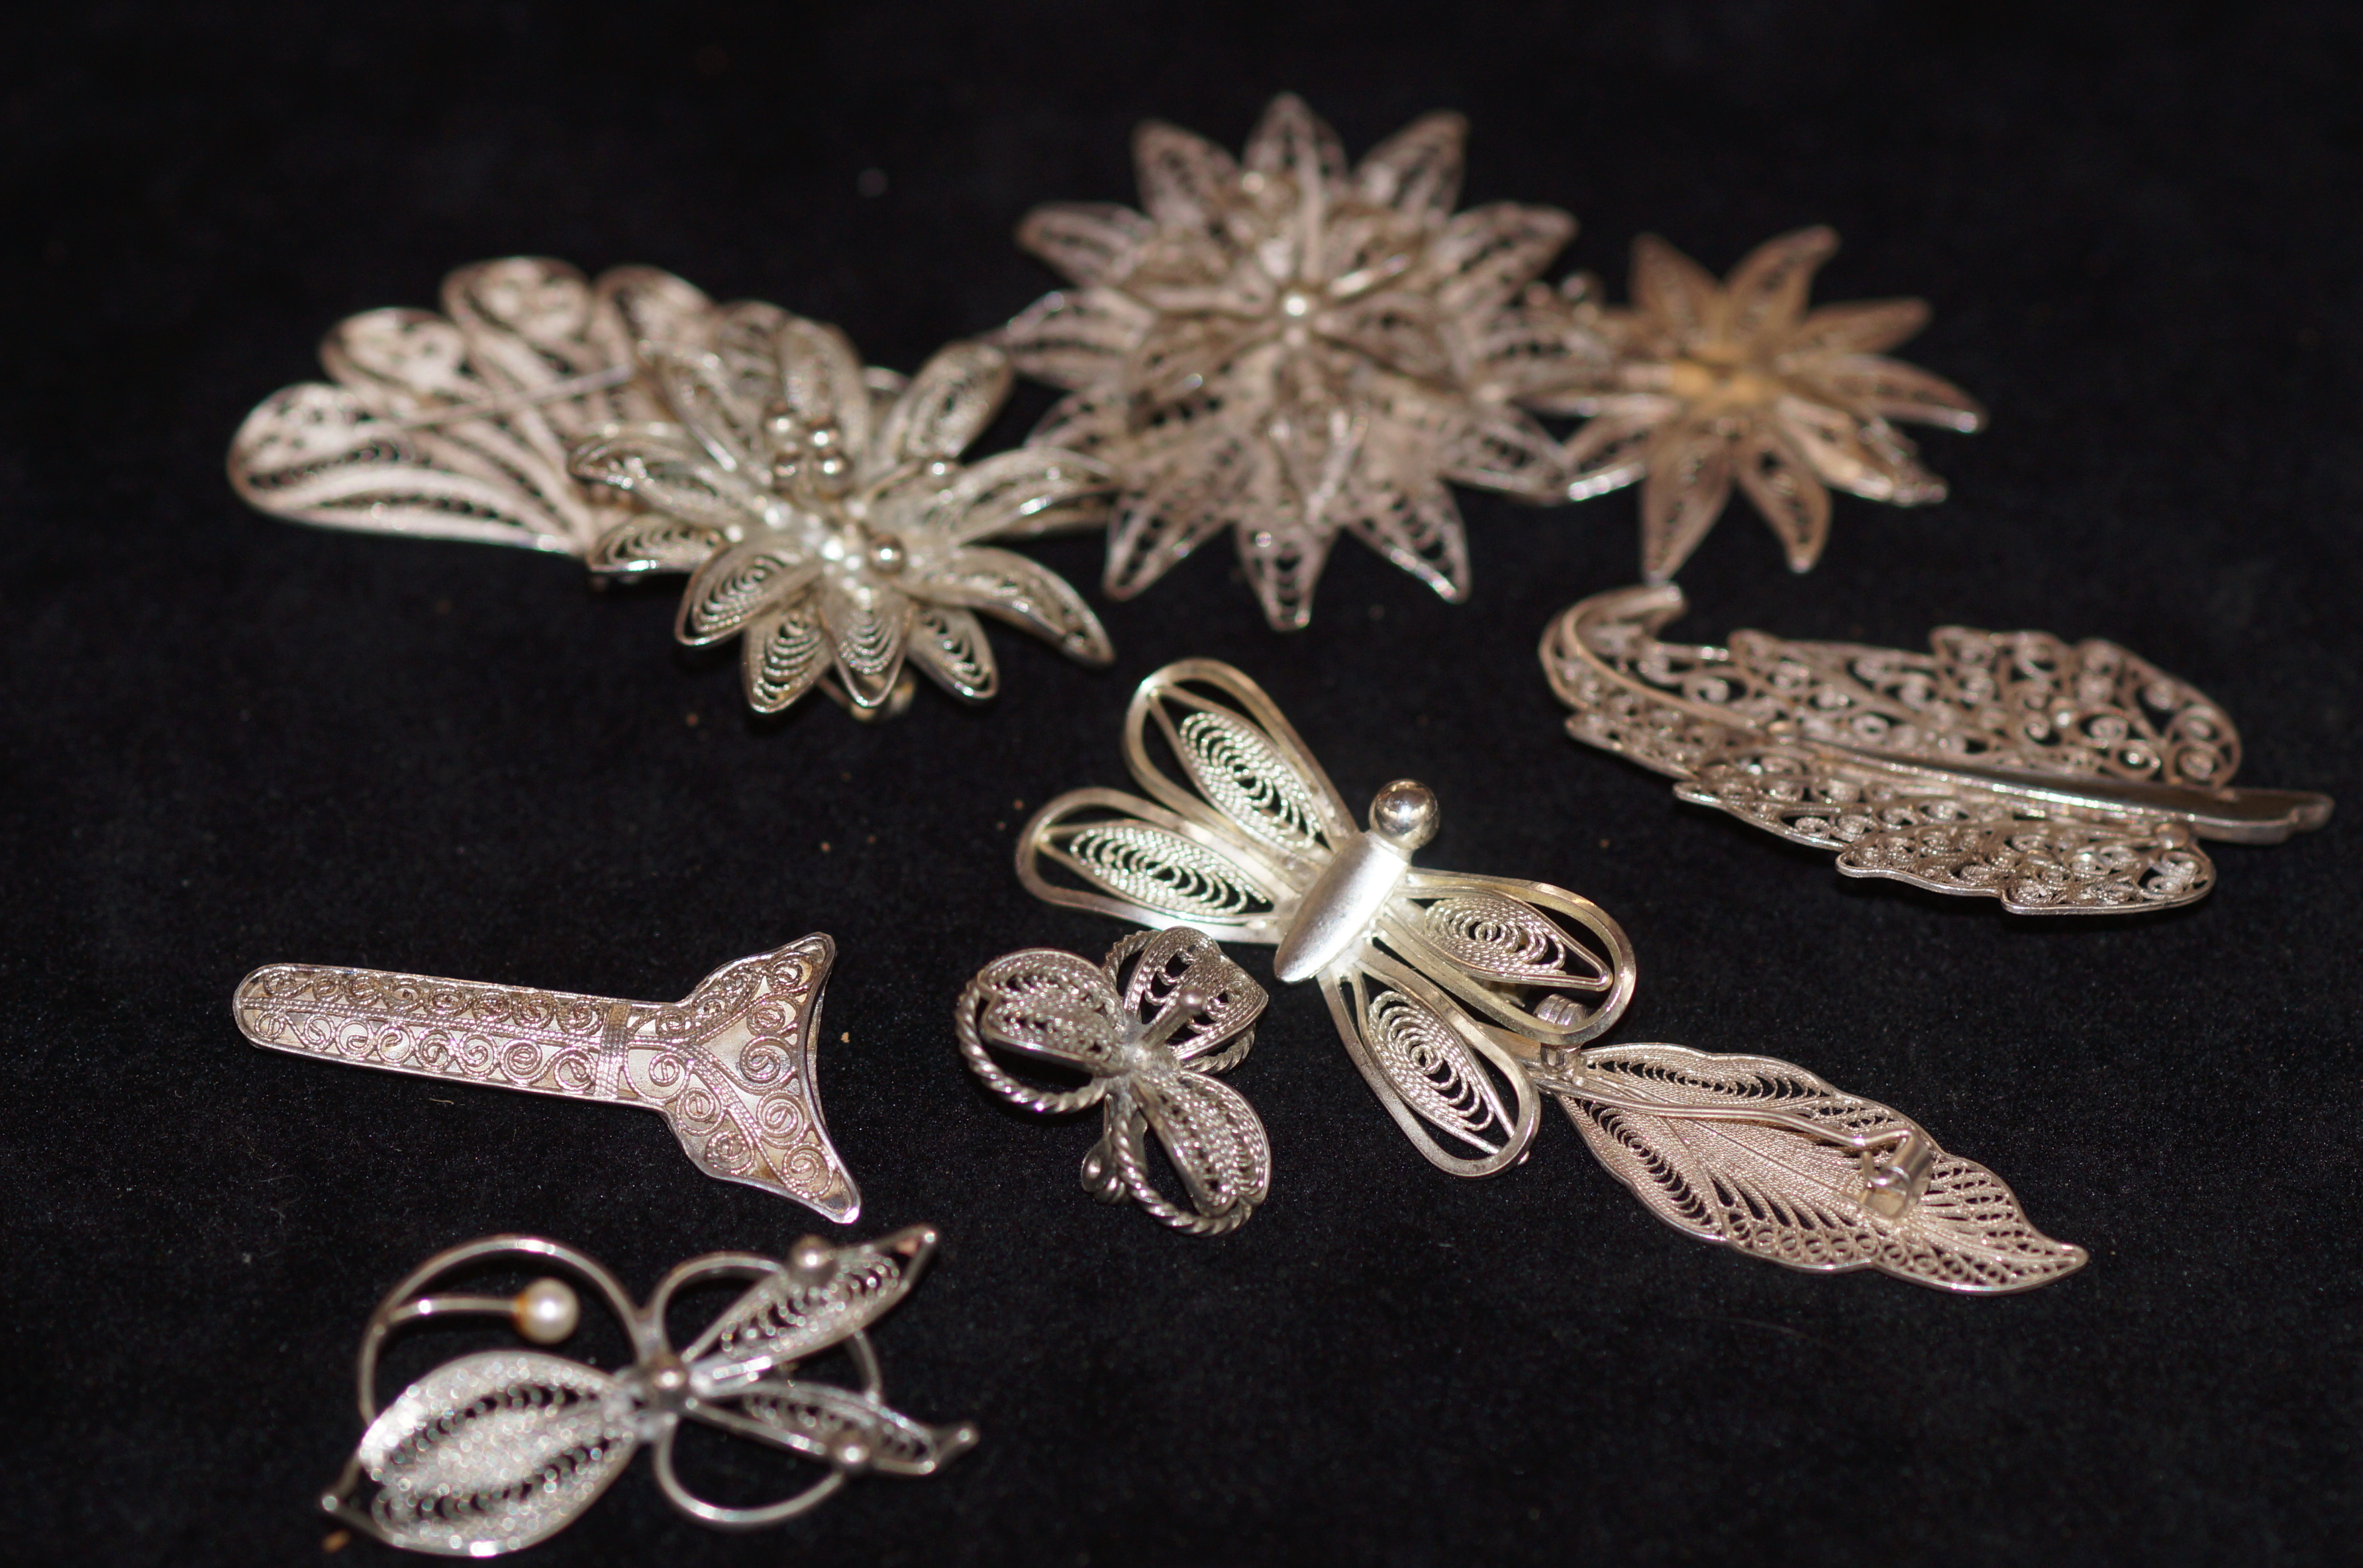 10 White metal brooches possibly silver